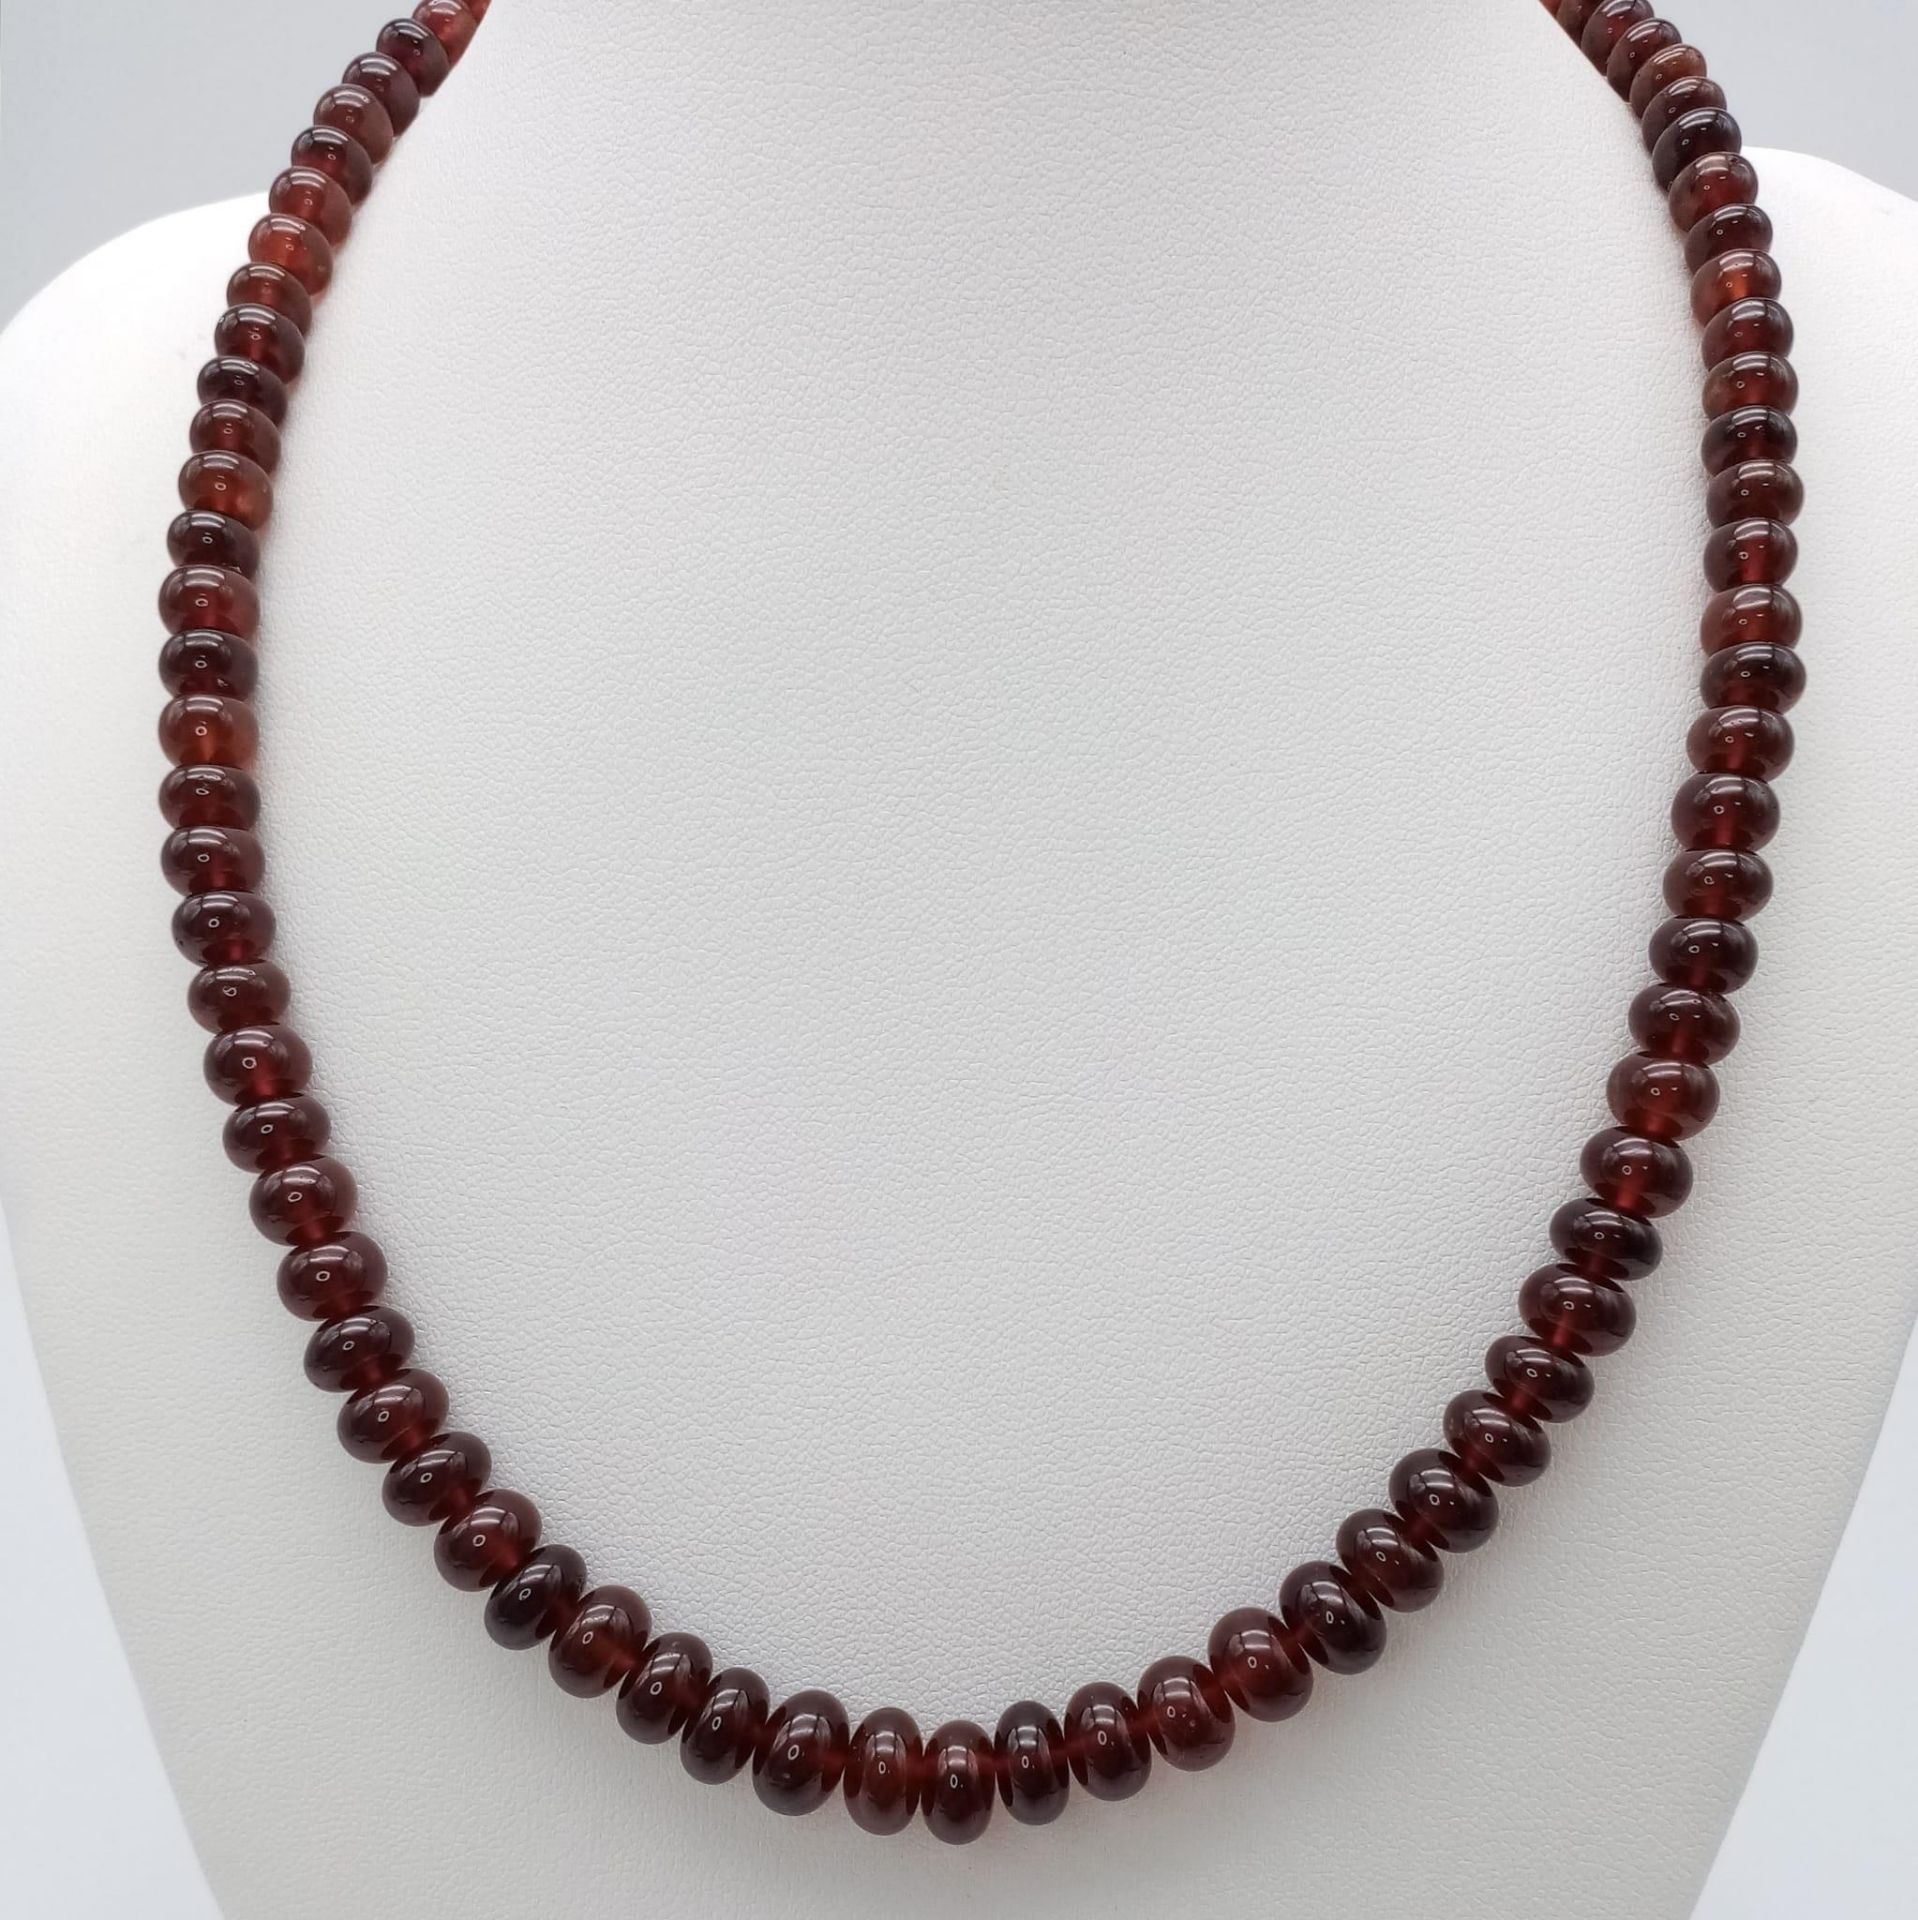 A 250ctw Garnet Rondelle Gemstone Necklace with Citrine Clasp set in 925 Silver. 42cm length. 49. - Image 3 of 8